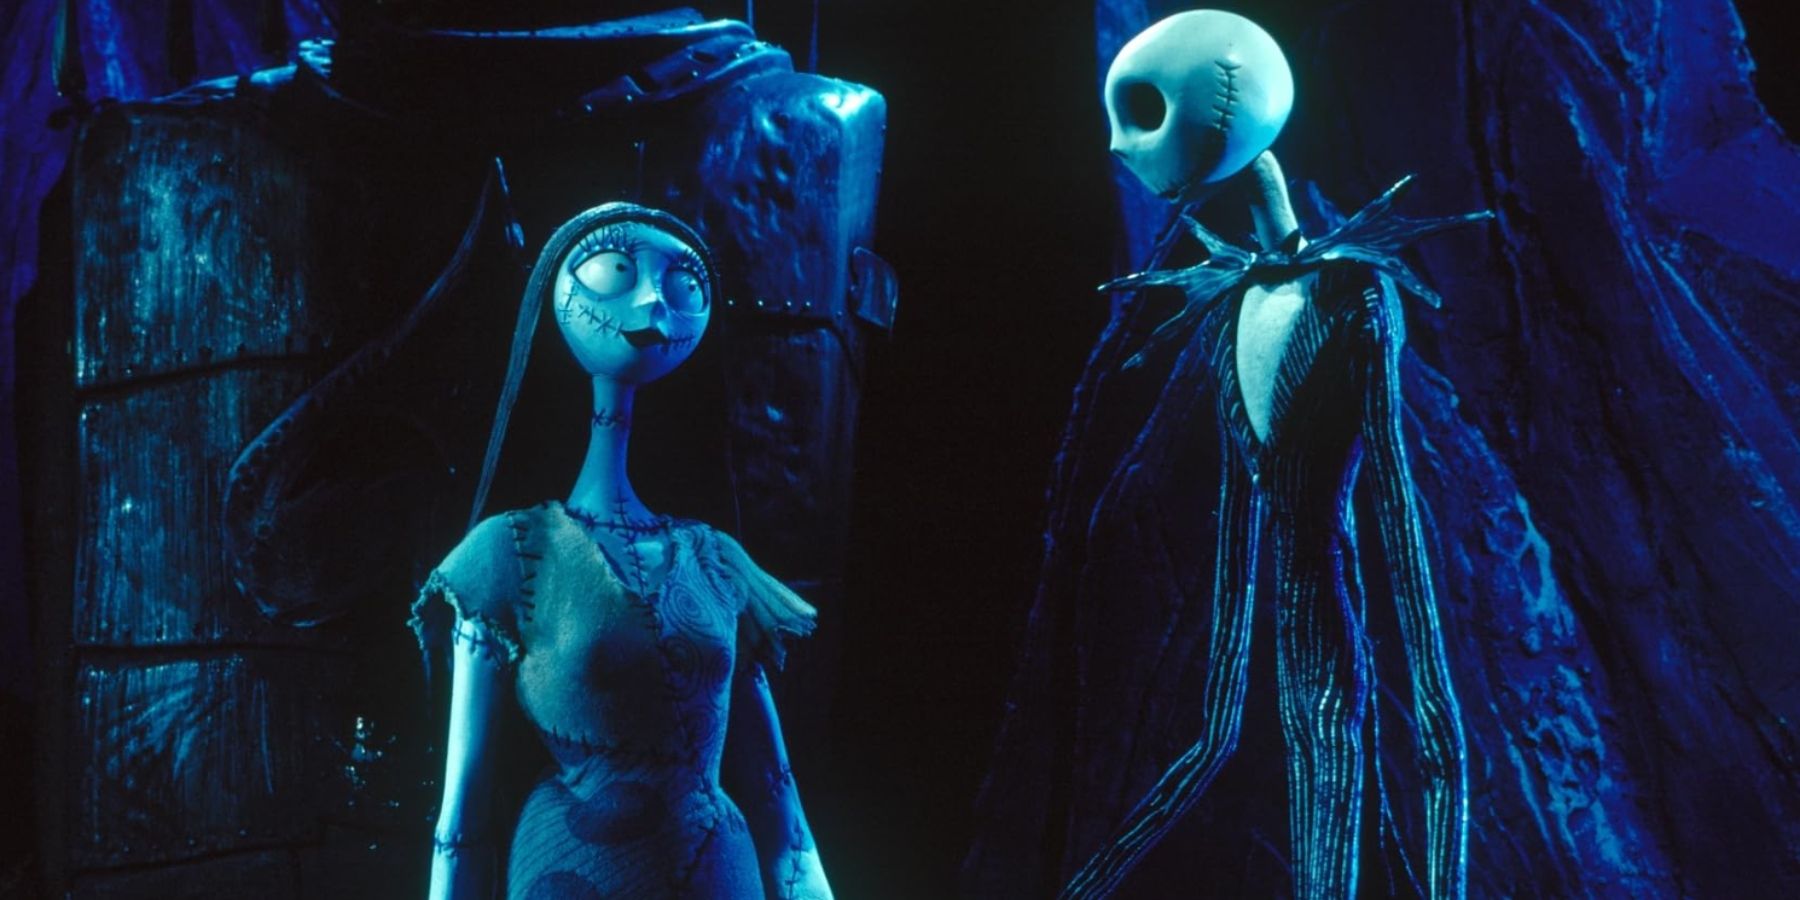 Sally and Jack Skellington in A Nightmare Before Christmas